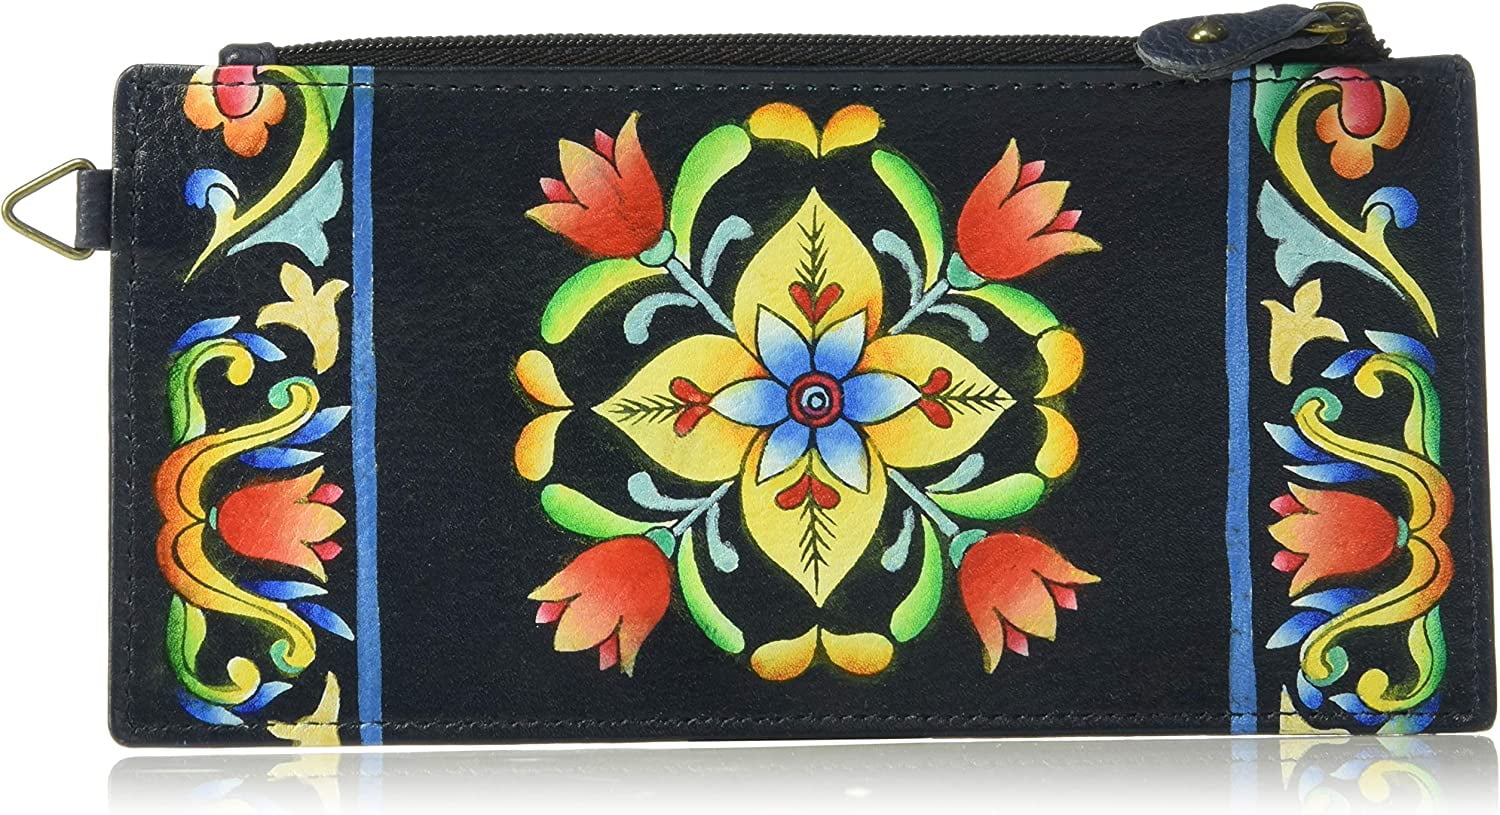  Anna by Anuschka Women's Hand-Painted Genuine Leather Organizer  Wallet On a String - Birds in Paradise Black : Clothing, Shoes & Jewelry